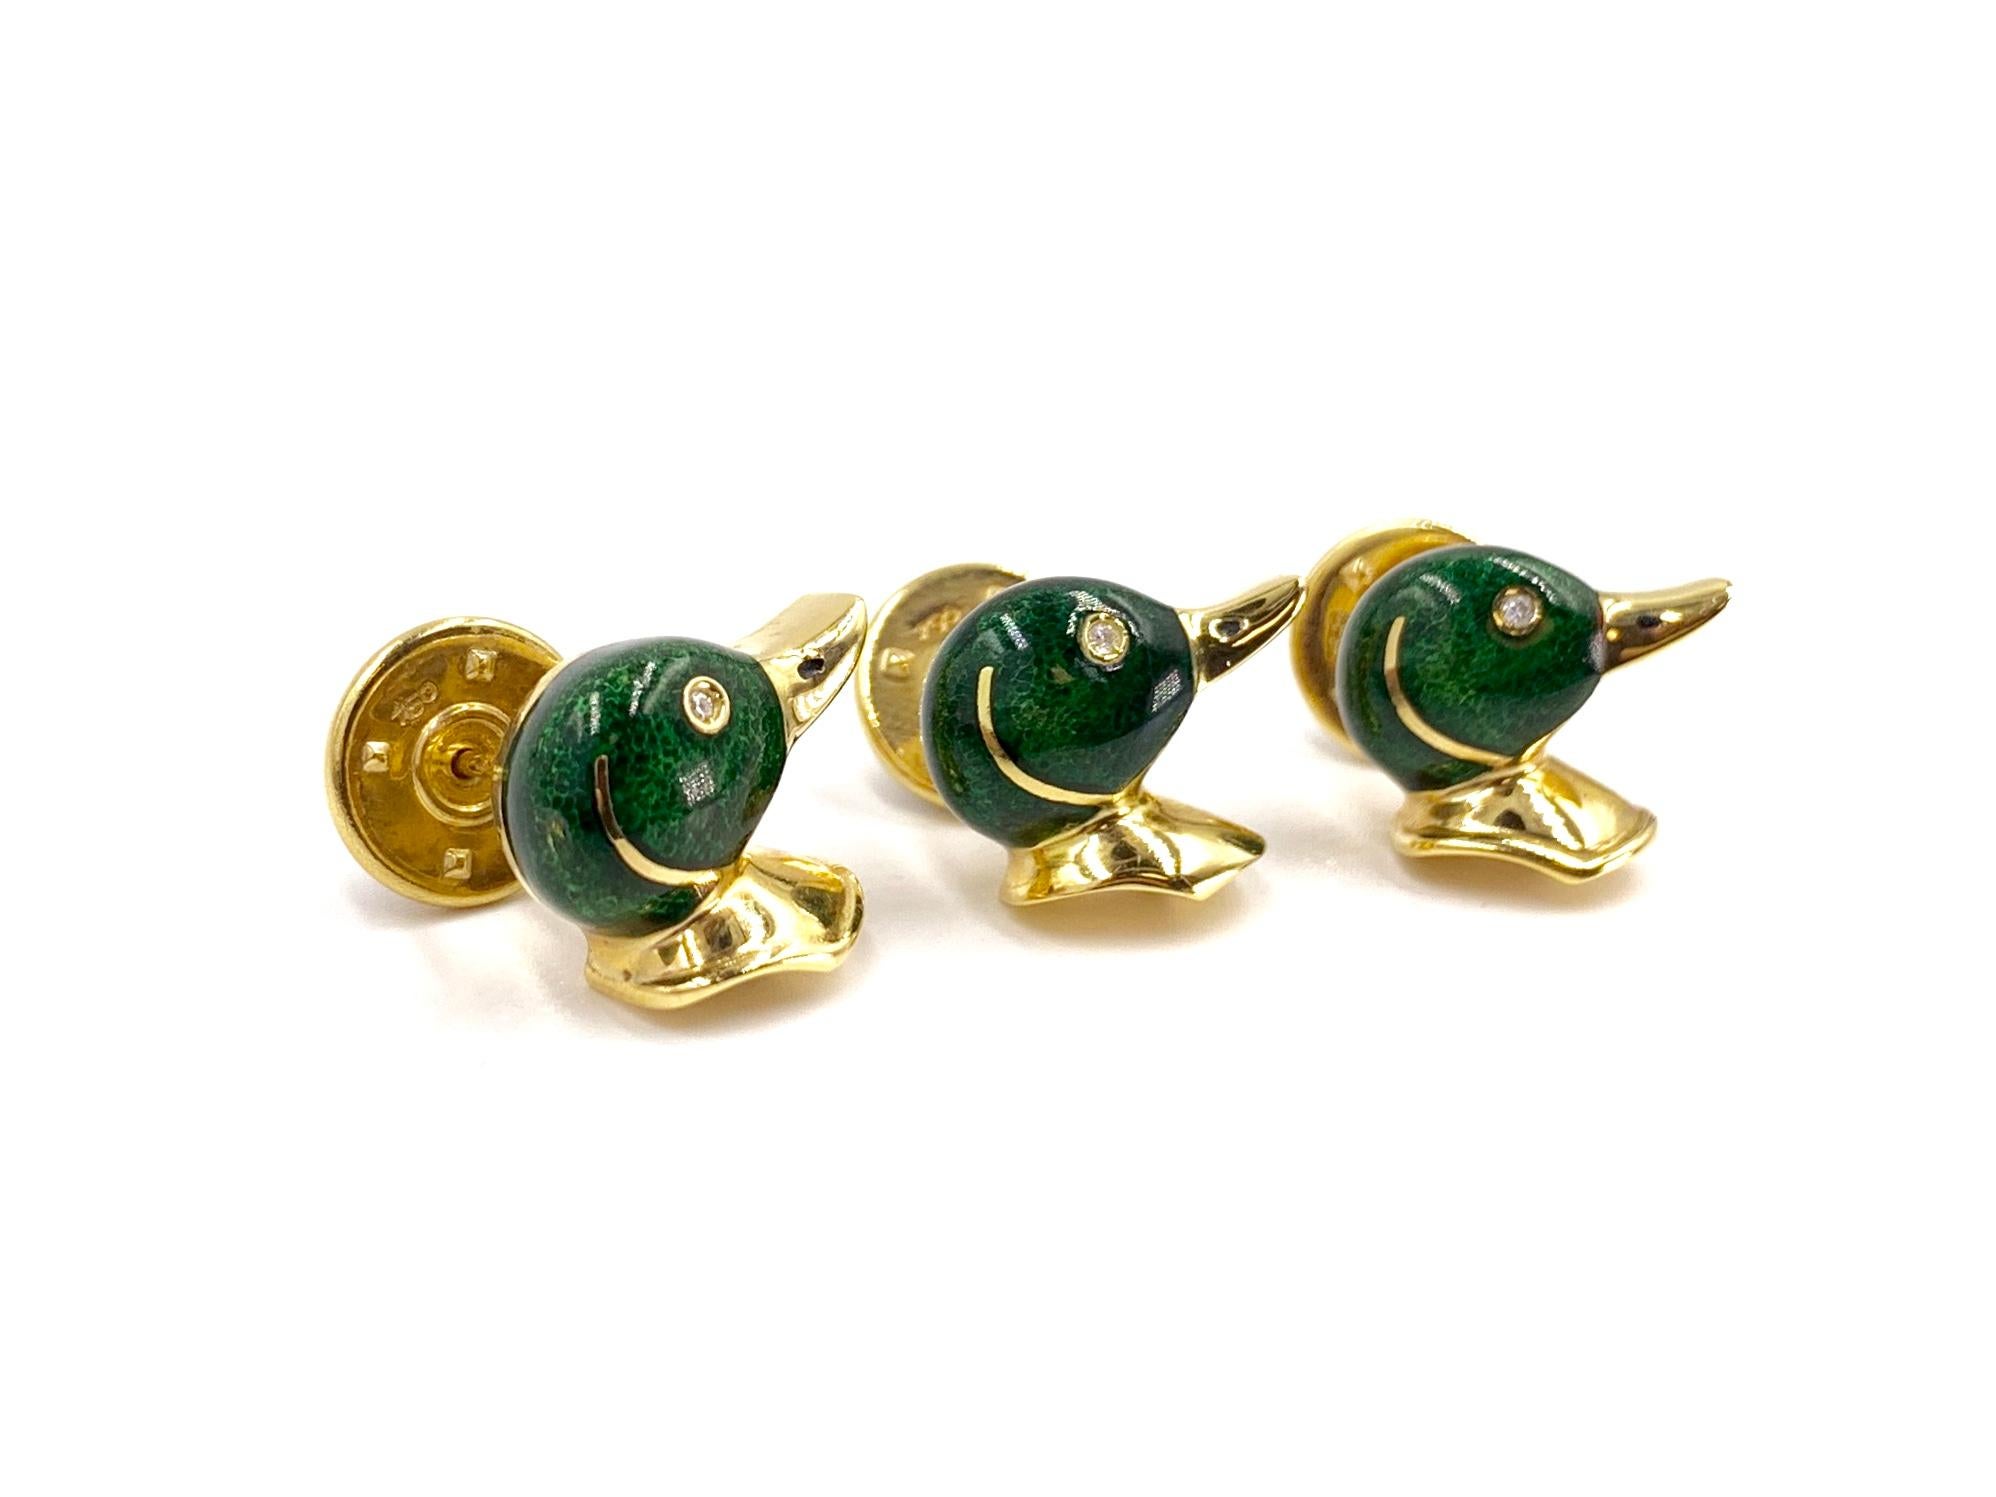 Made with superior quality by Tännler of Switzerland jewelry company. Set of 3 classic mallard duck head shirt studs made in 18 karat yellow gold with dark green enamel and a single round diamond eye. Signed with trademark on back of each